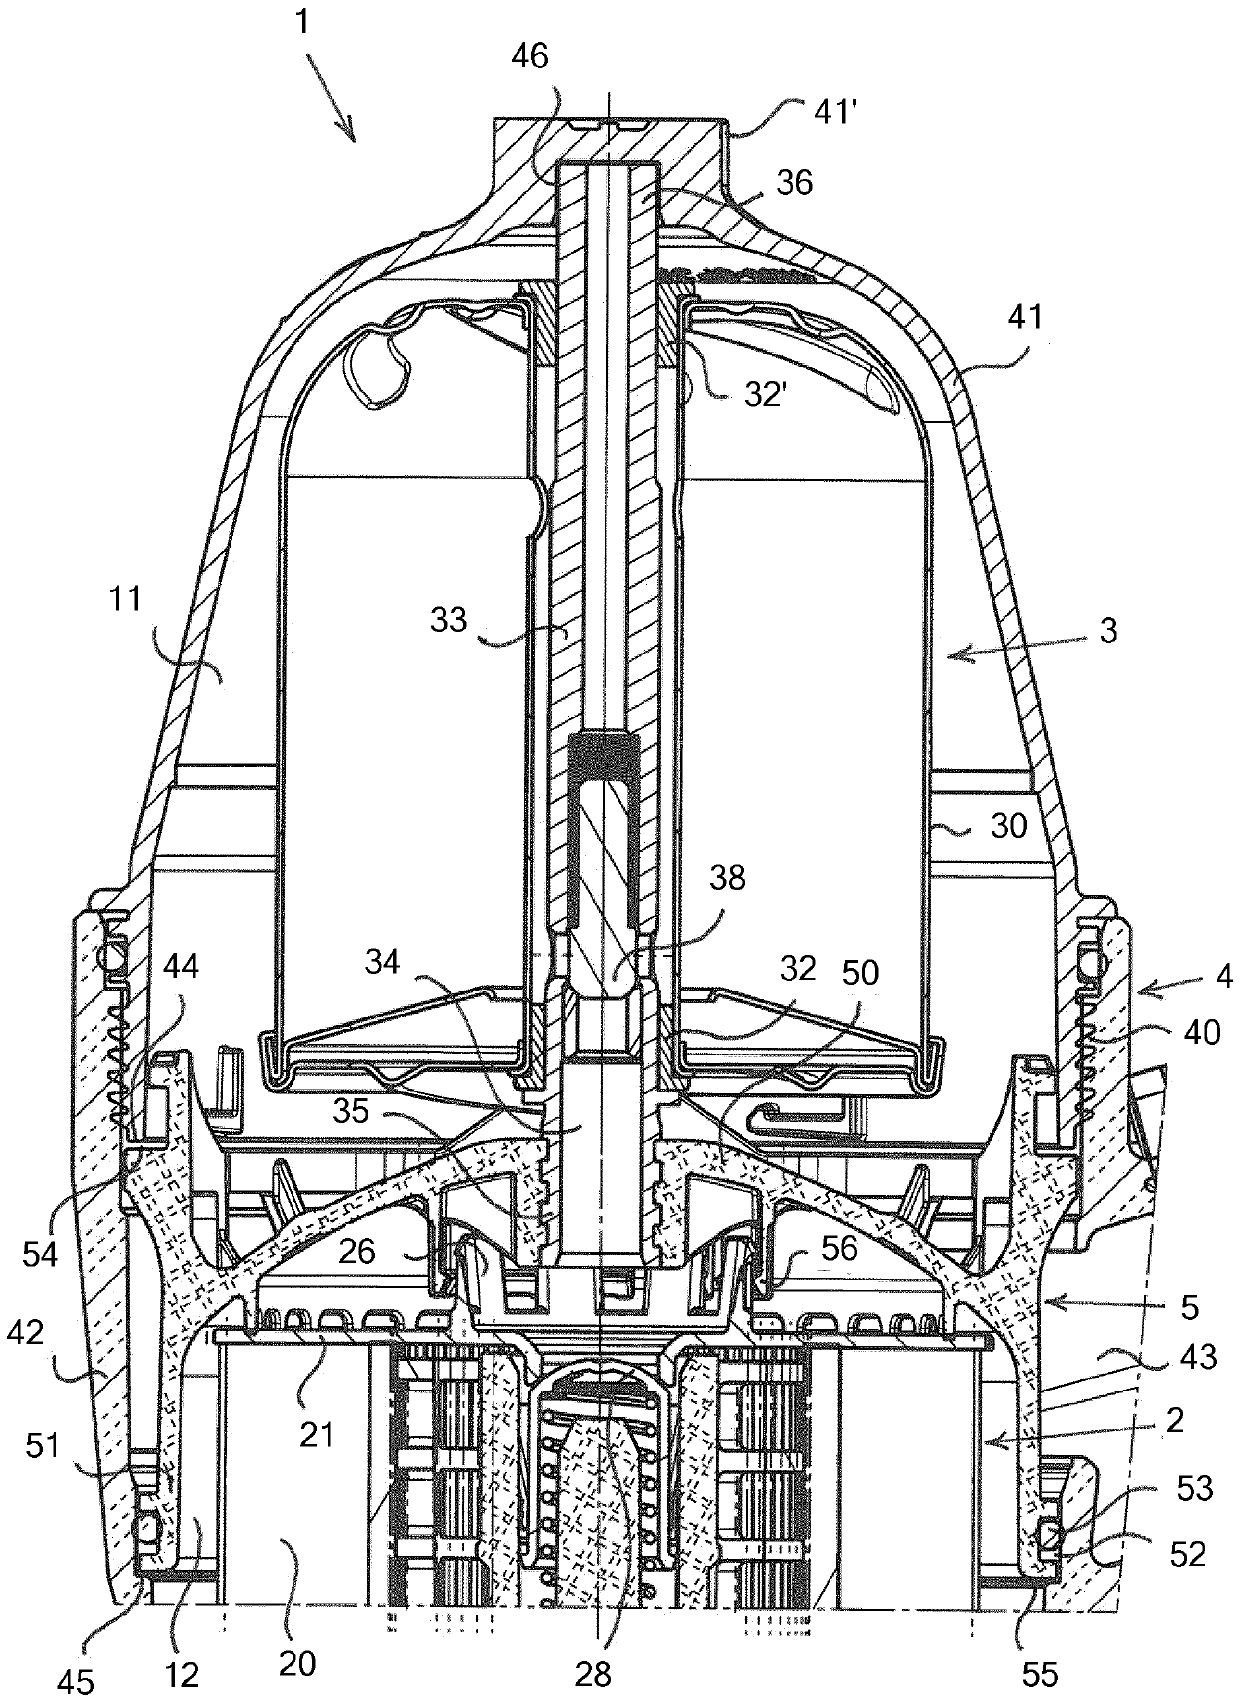 Device for removing impurities from the lubricating oil of an internal combustion engine